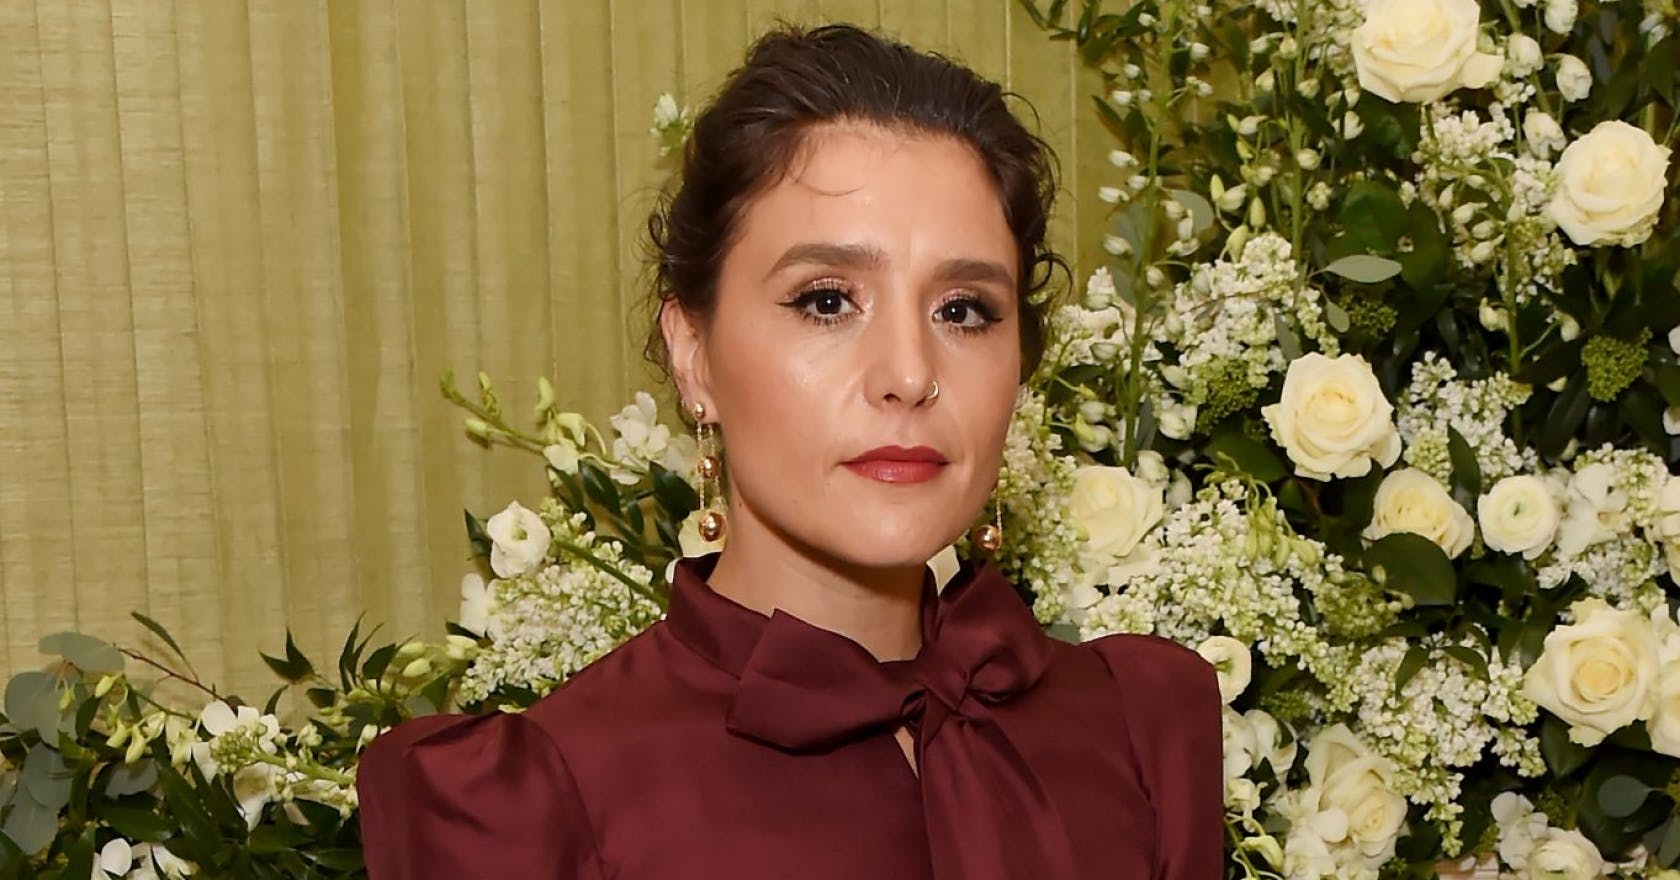 Jessie Ware explains why she cannot forgive her father